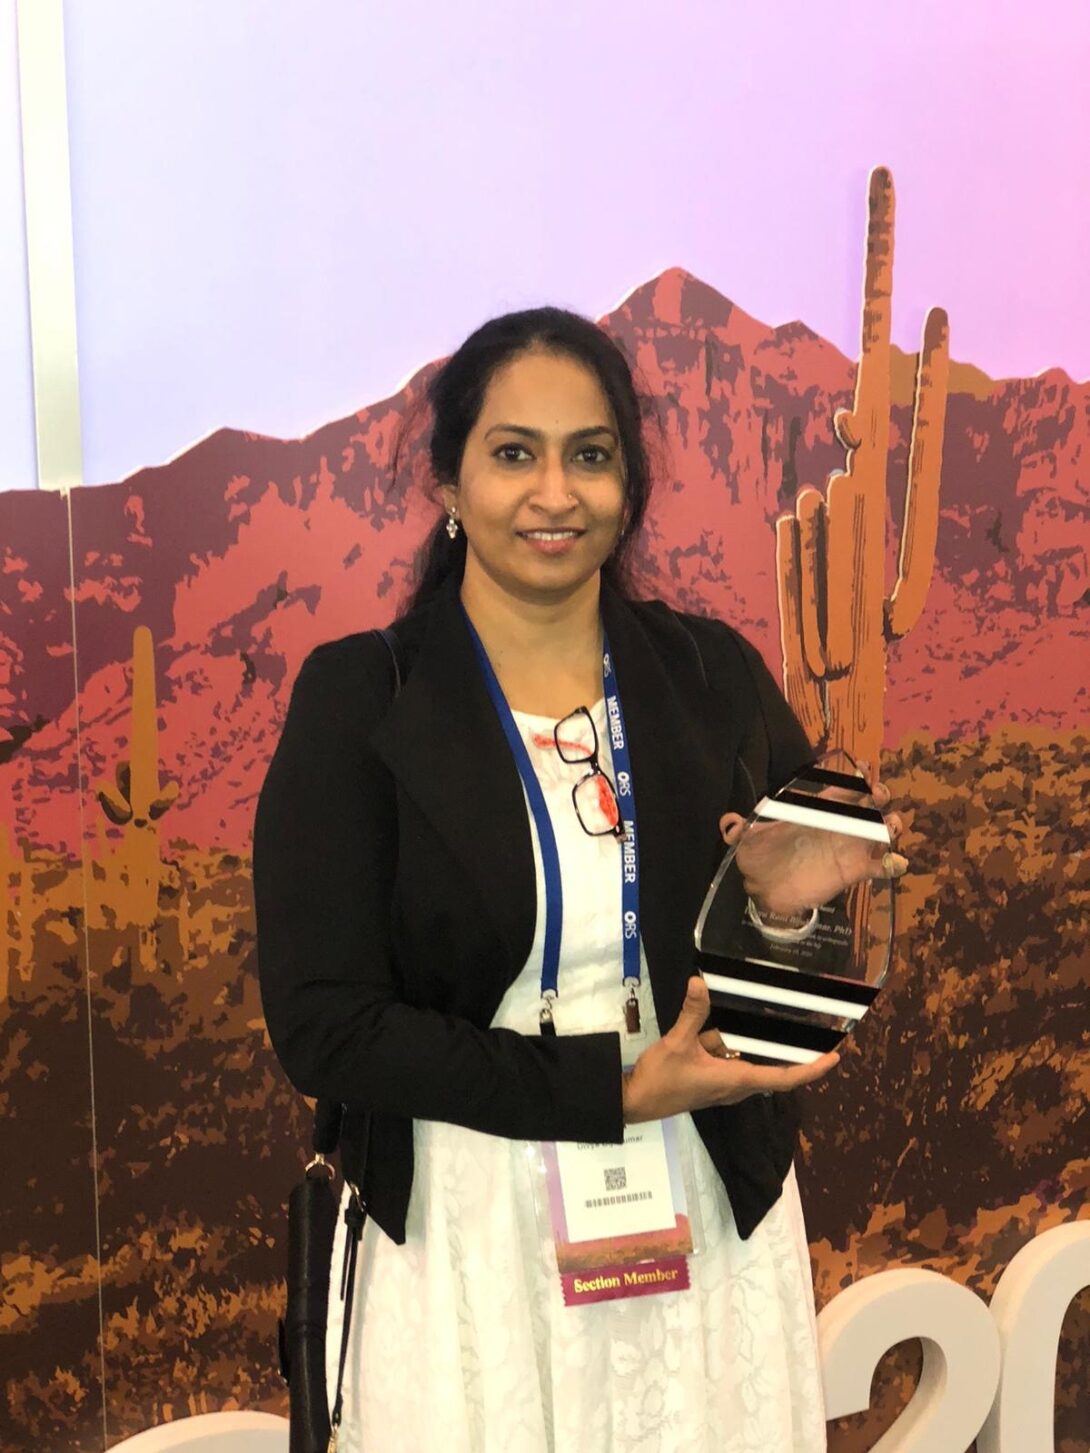 Dr. Bijukumar received the 2020 Harris Award at the Orthopaedic Research Society conference in Phoenix, Ariz.